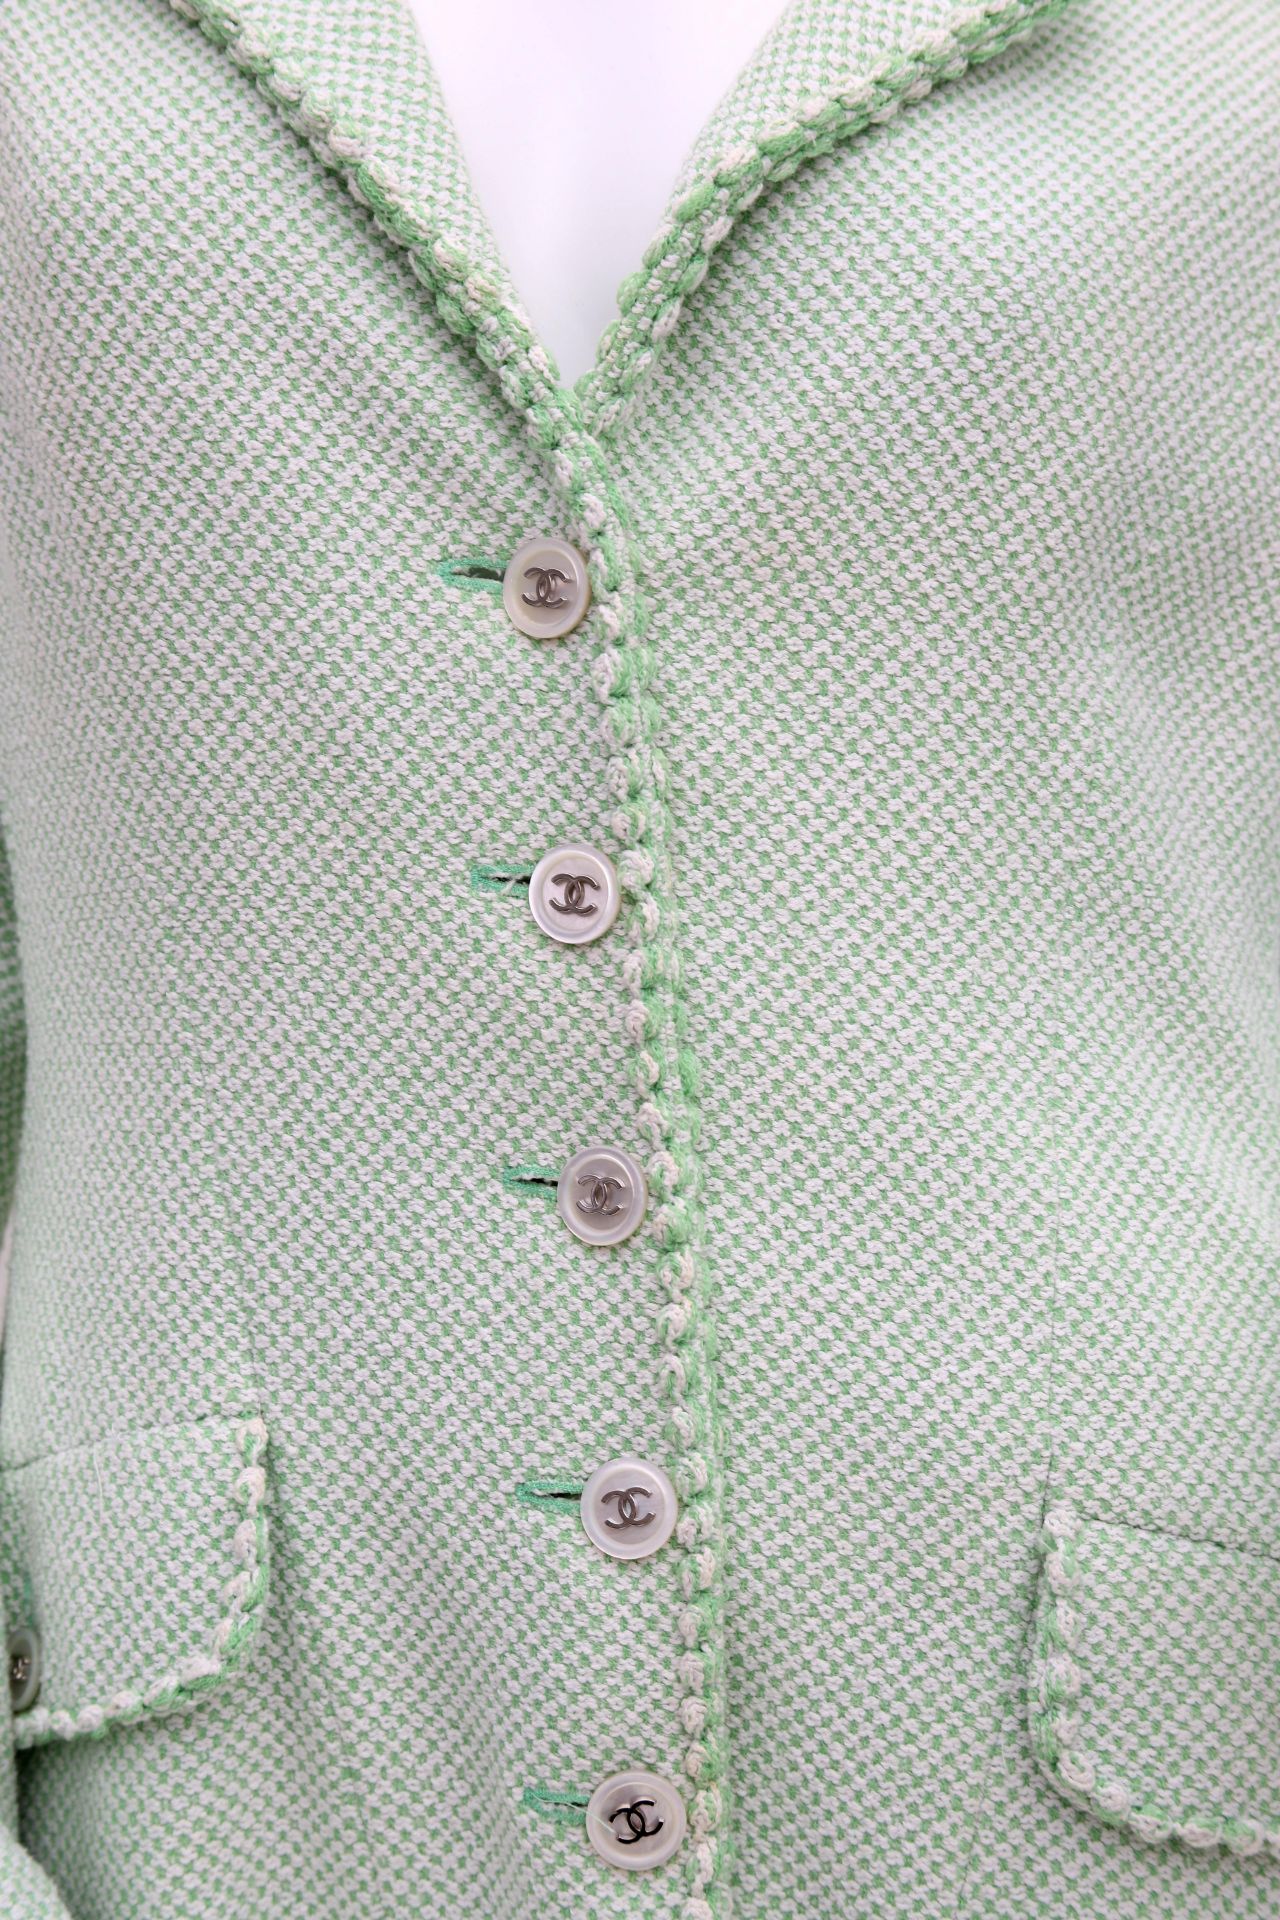 A Chanel Boutique ensamble a green and white mixed blazer and a skirt. The blazer has a reverse - Image 9 of 9